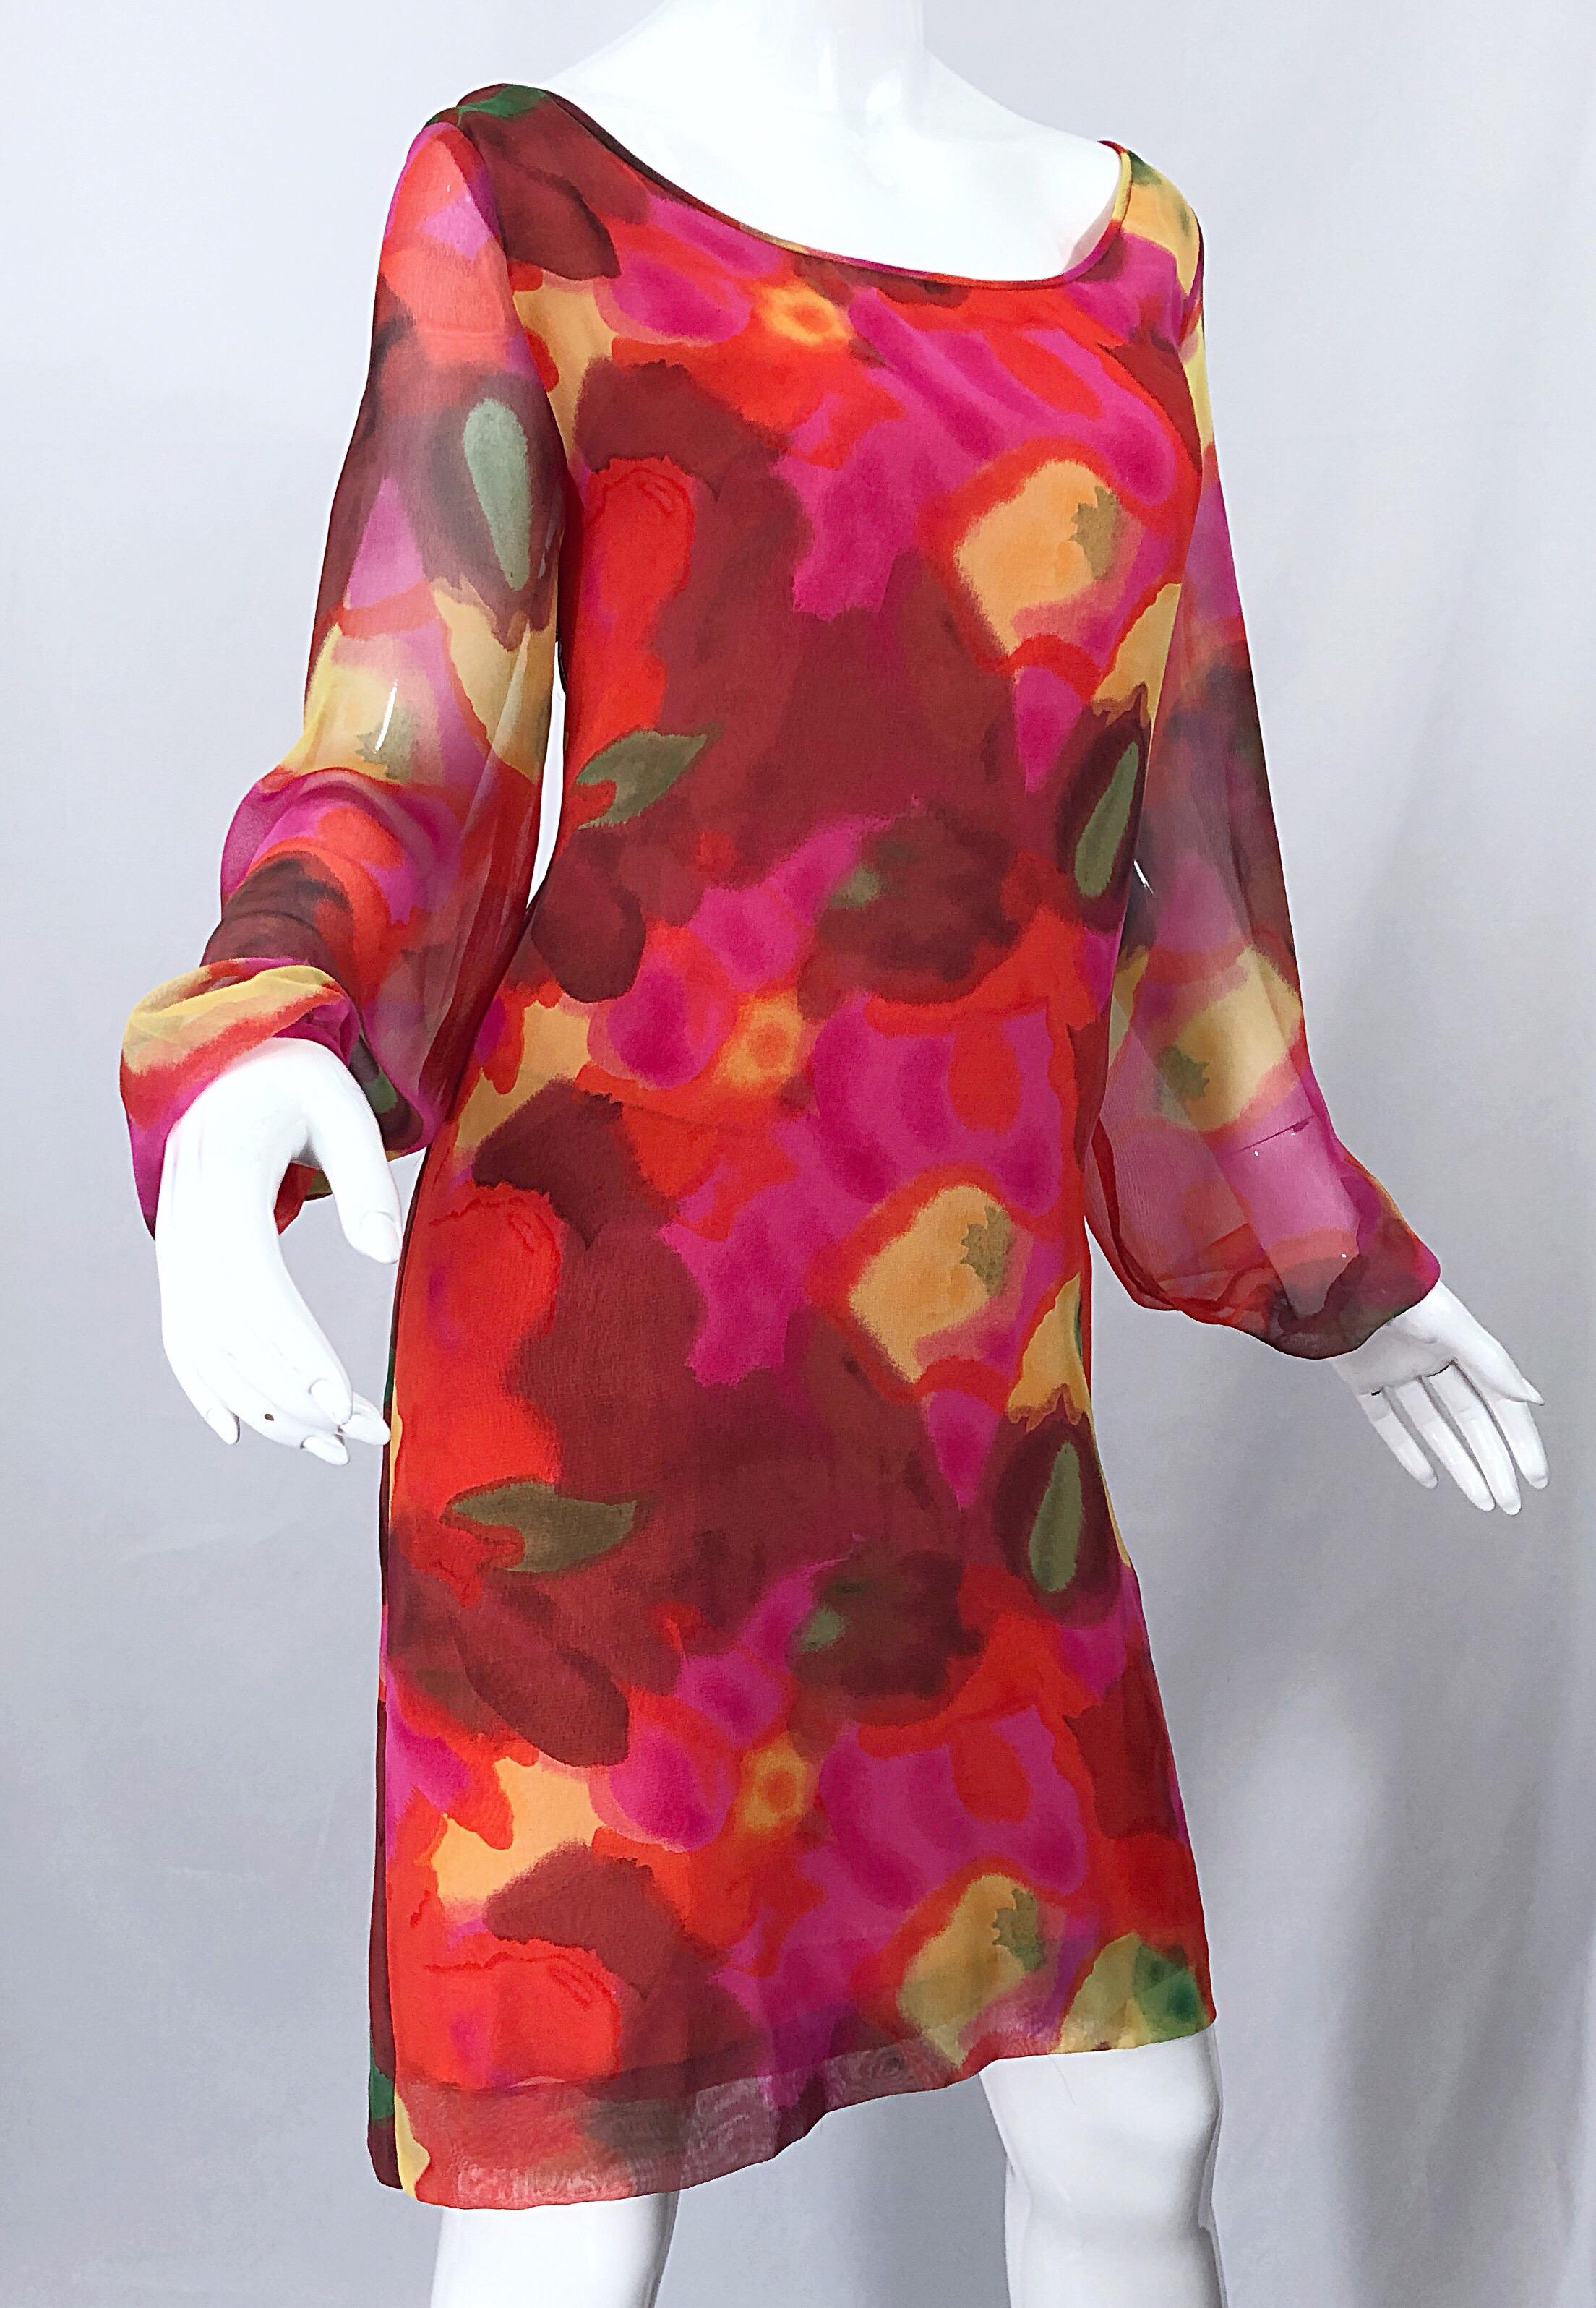 Vintage Elizabeth Arden Silk Chiffon 1960s Style Hot Pink Watercolor Dress In Excellent Condition For Sale In San Diego, CA